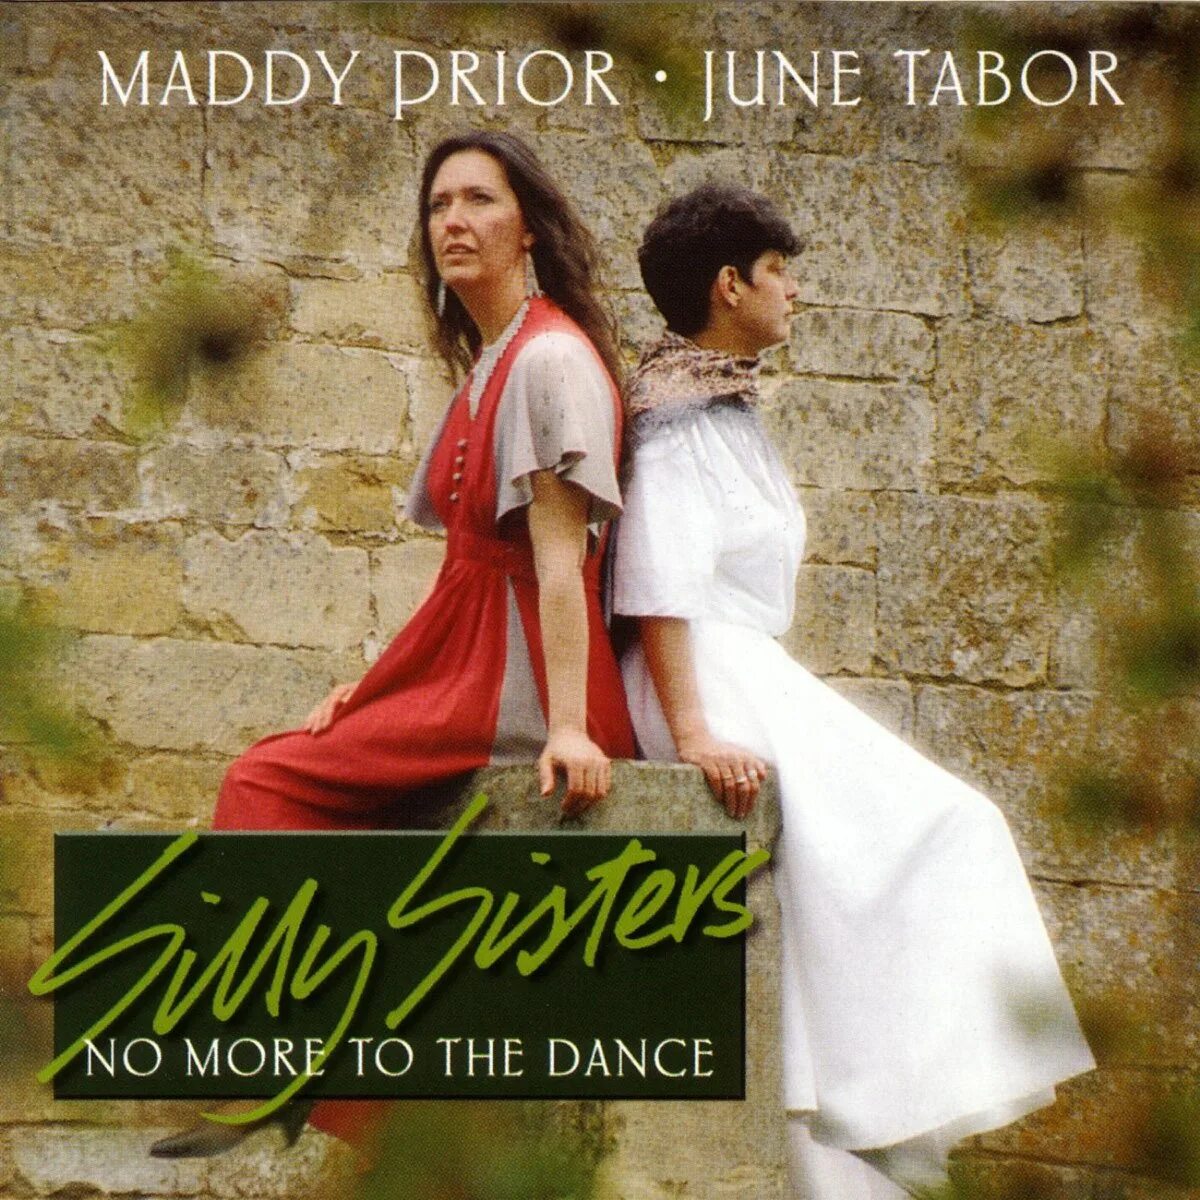 Мэдди Прайор. Maddy prior & June Tabor 1988-silly sisters. Maddy prior no more to the Dance. The Definitive collection (2003) - June Tabor. Sister no more